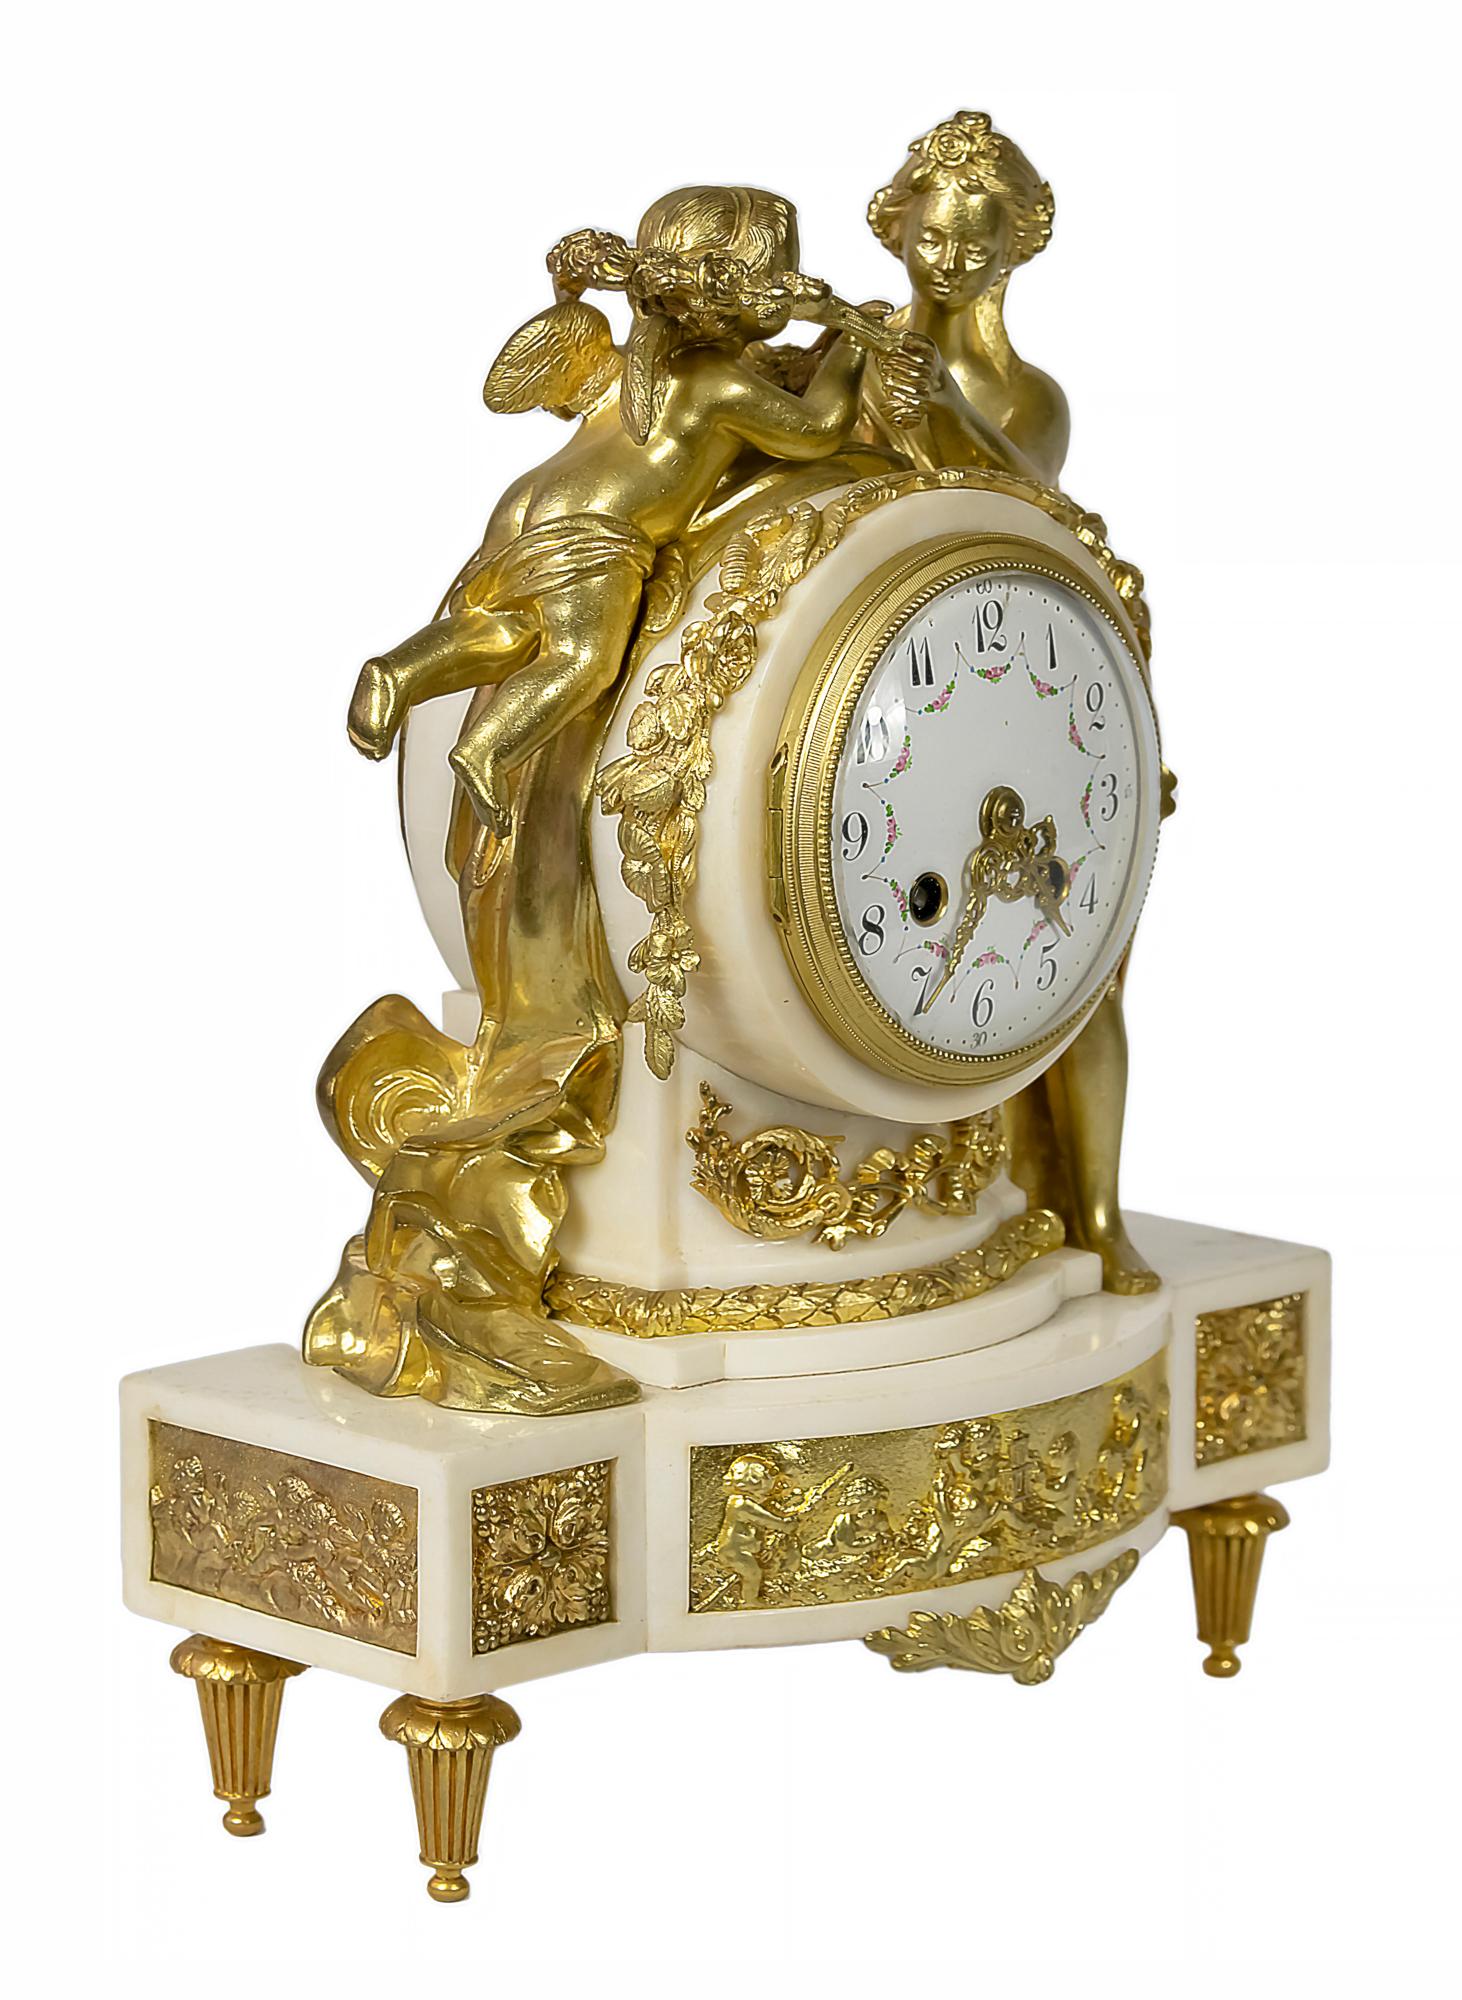 Antique 19th century French Louis XVI style gilded bronze and white marble mantel clock.
The circular case is decorated with a floral elements and surmounted by the figures of Venus and Cupid.
The dial is in Arabic numerals on white enamel plaque